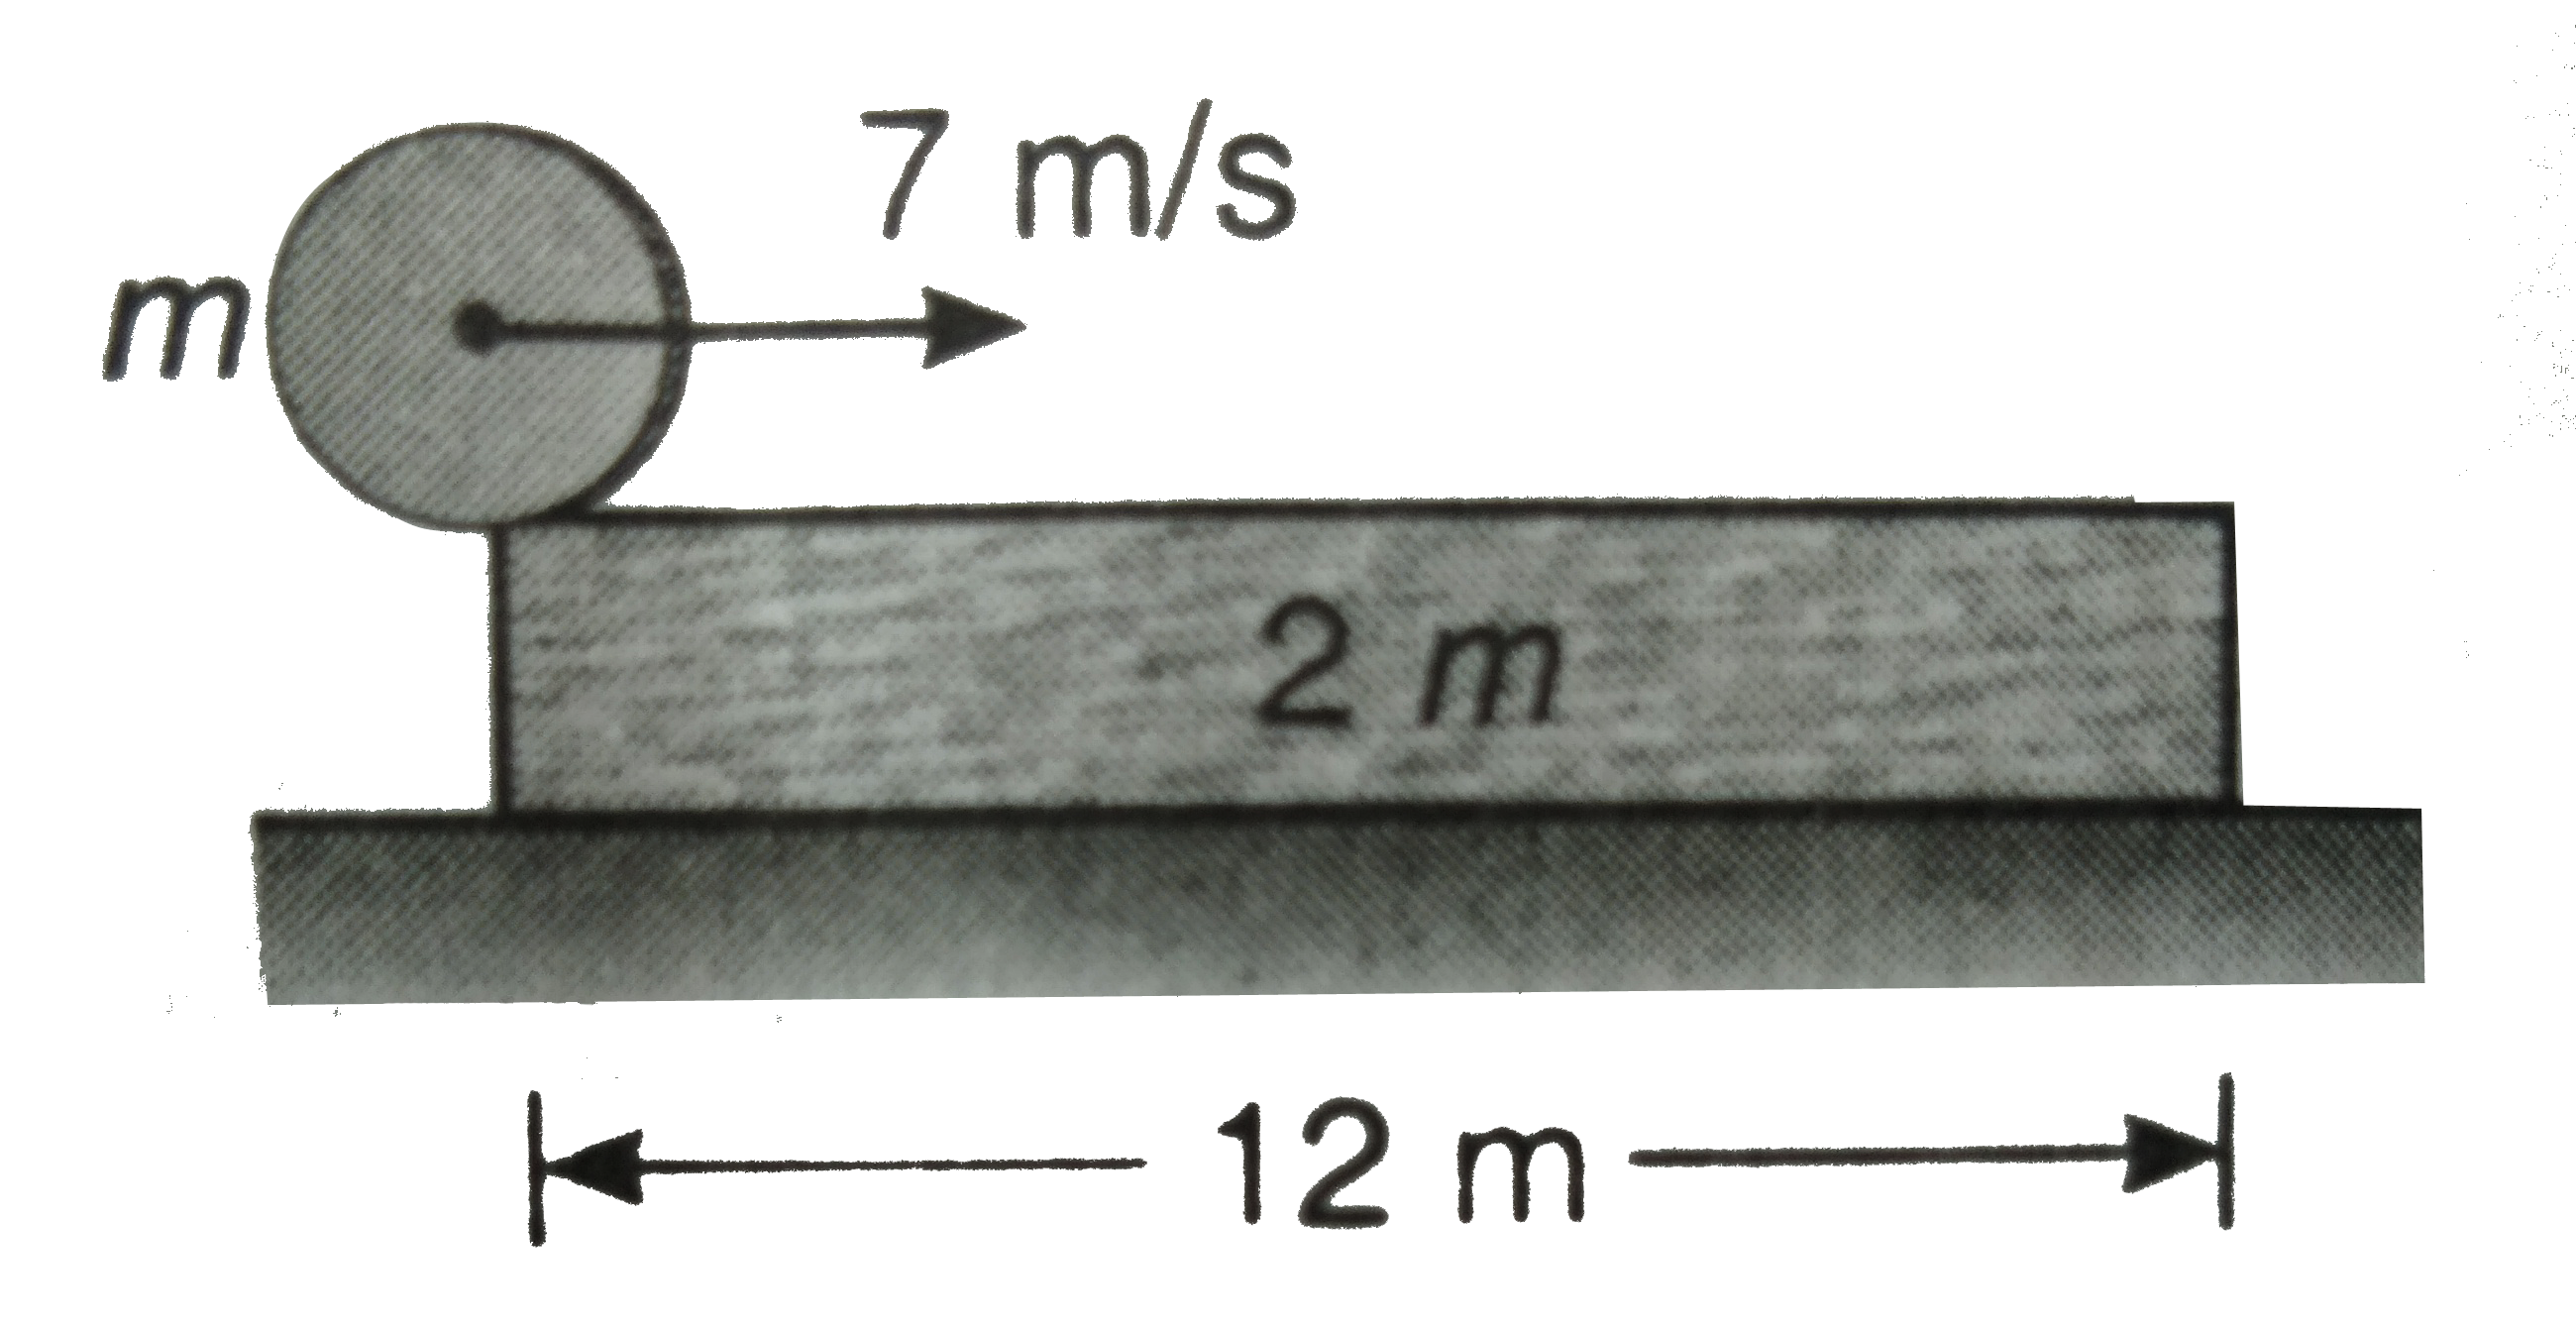 A cylinder of mass m is kept on the edge of a plank of mass 2m and length 12m, which in turn is kept on smooth ground. Coefficient of friction between the plank and the cylinder is 0.1. The cylinder is given an impulse, which imparts it a velocity 7m//s but no angular velocity. find the time after which the cylinder falls off the plank. (g=10m//s^(2))